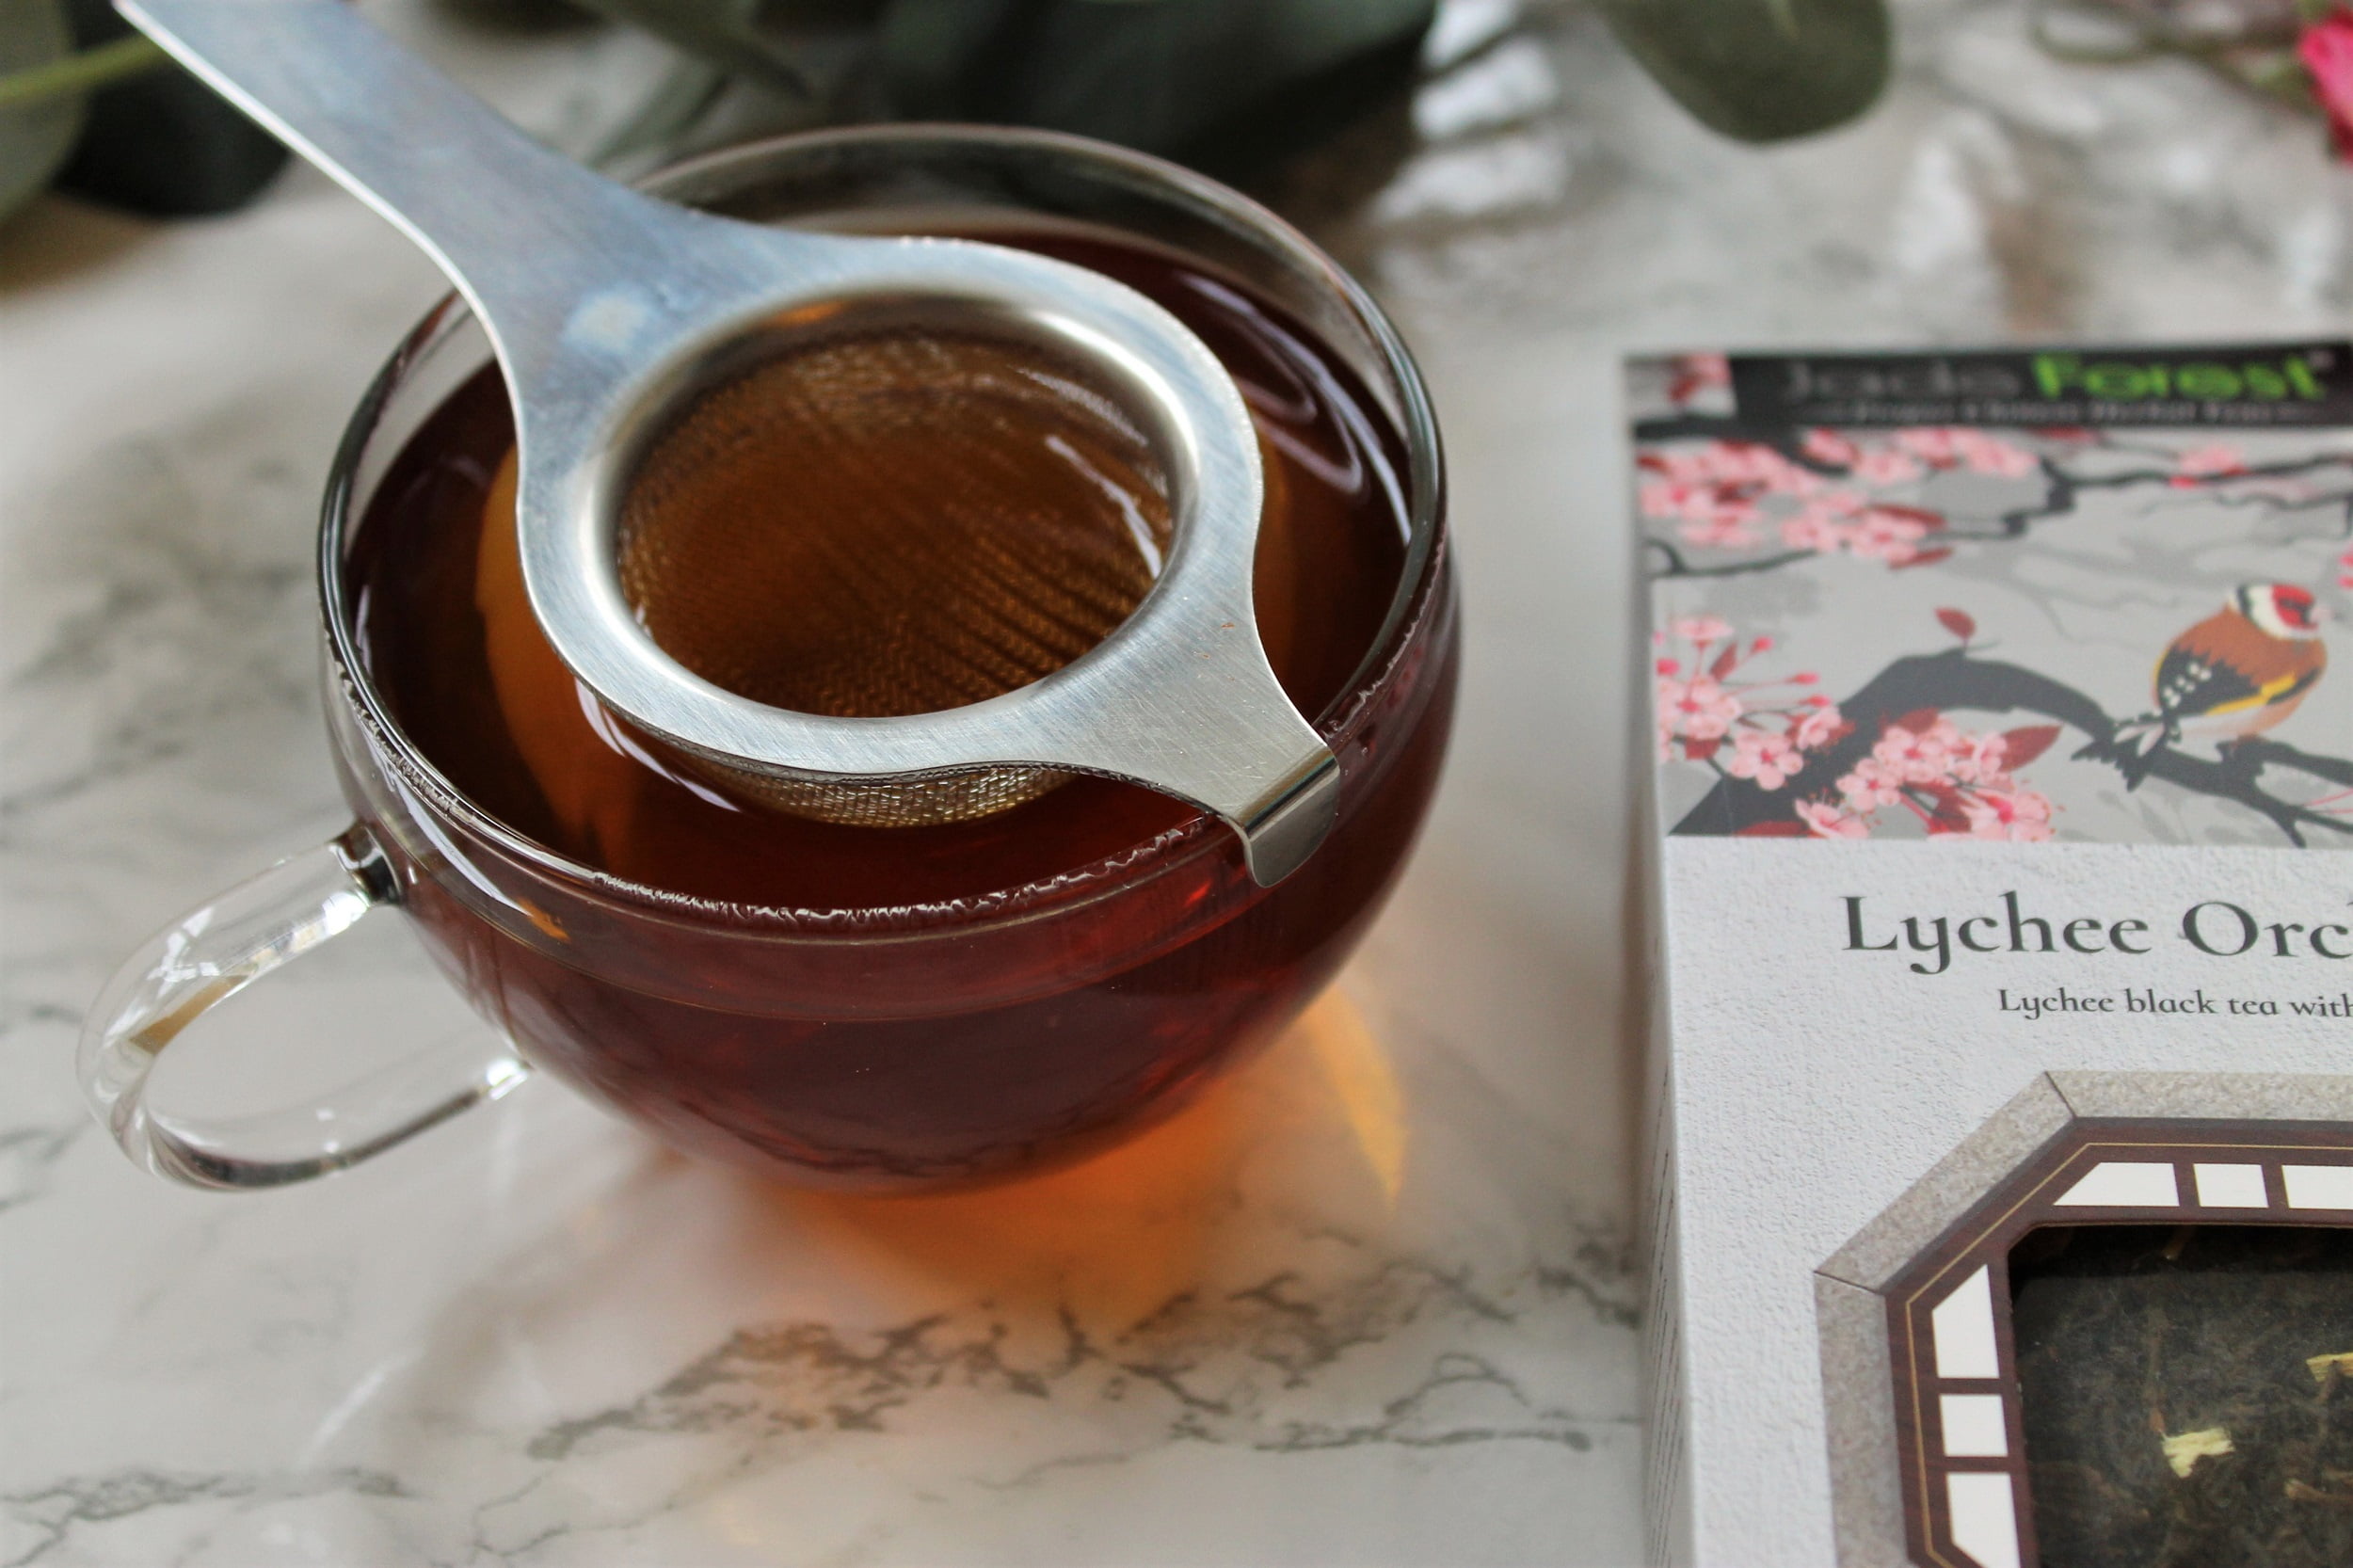 lychee infused black tea from China